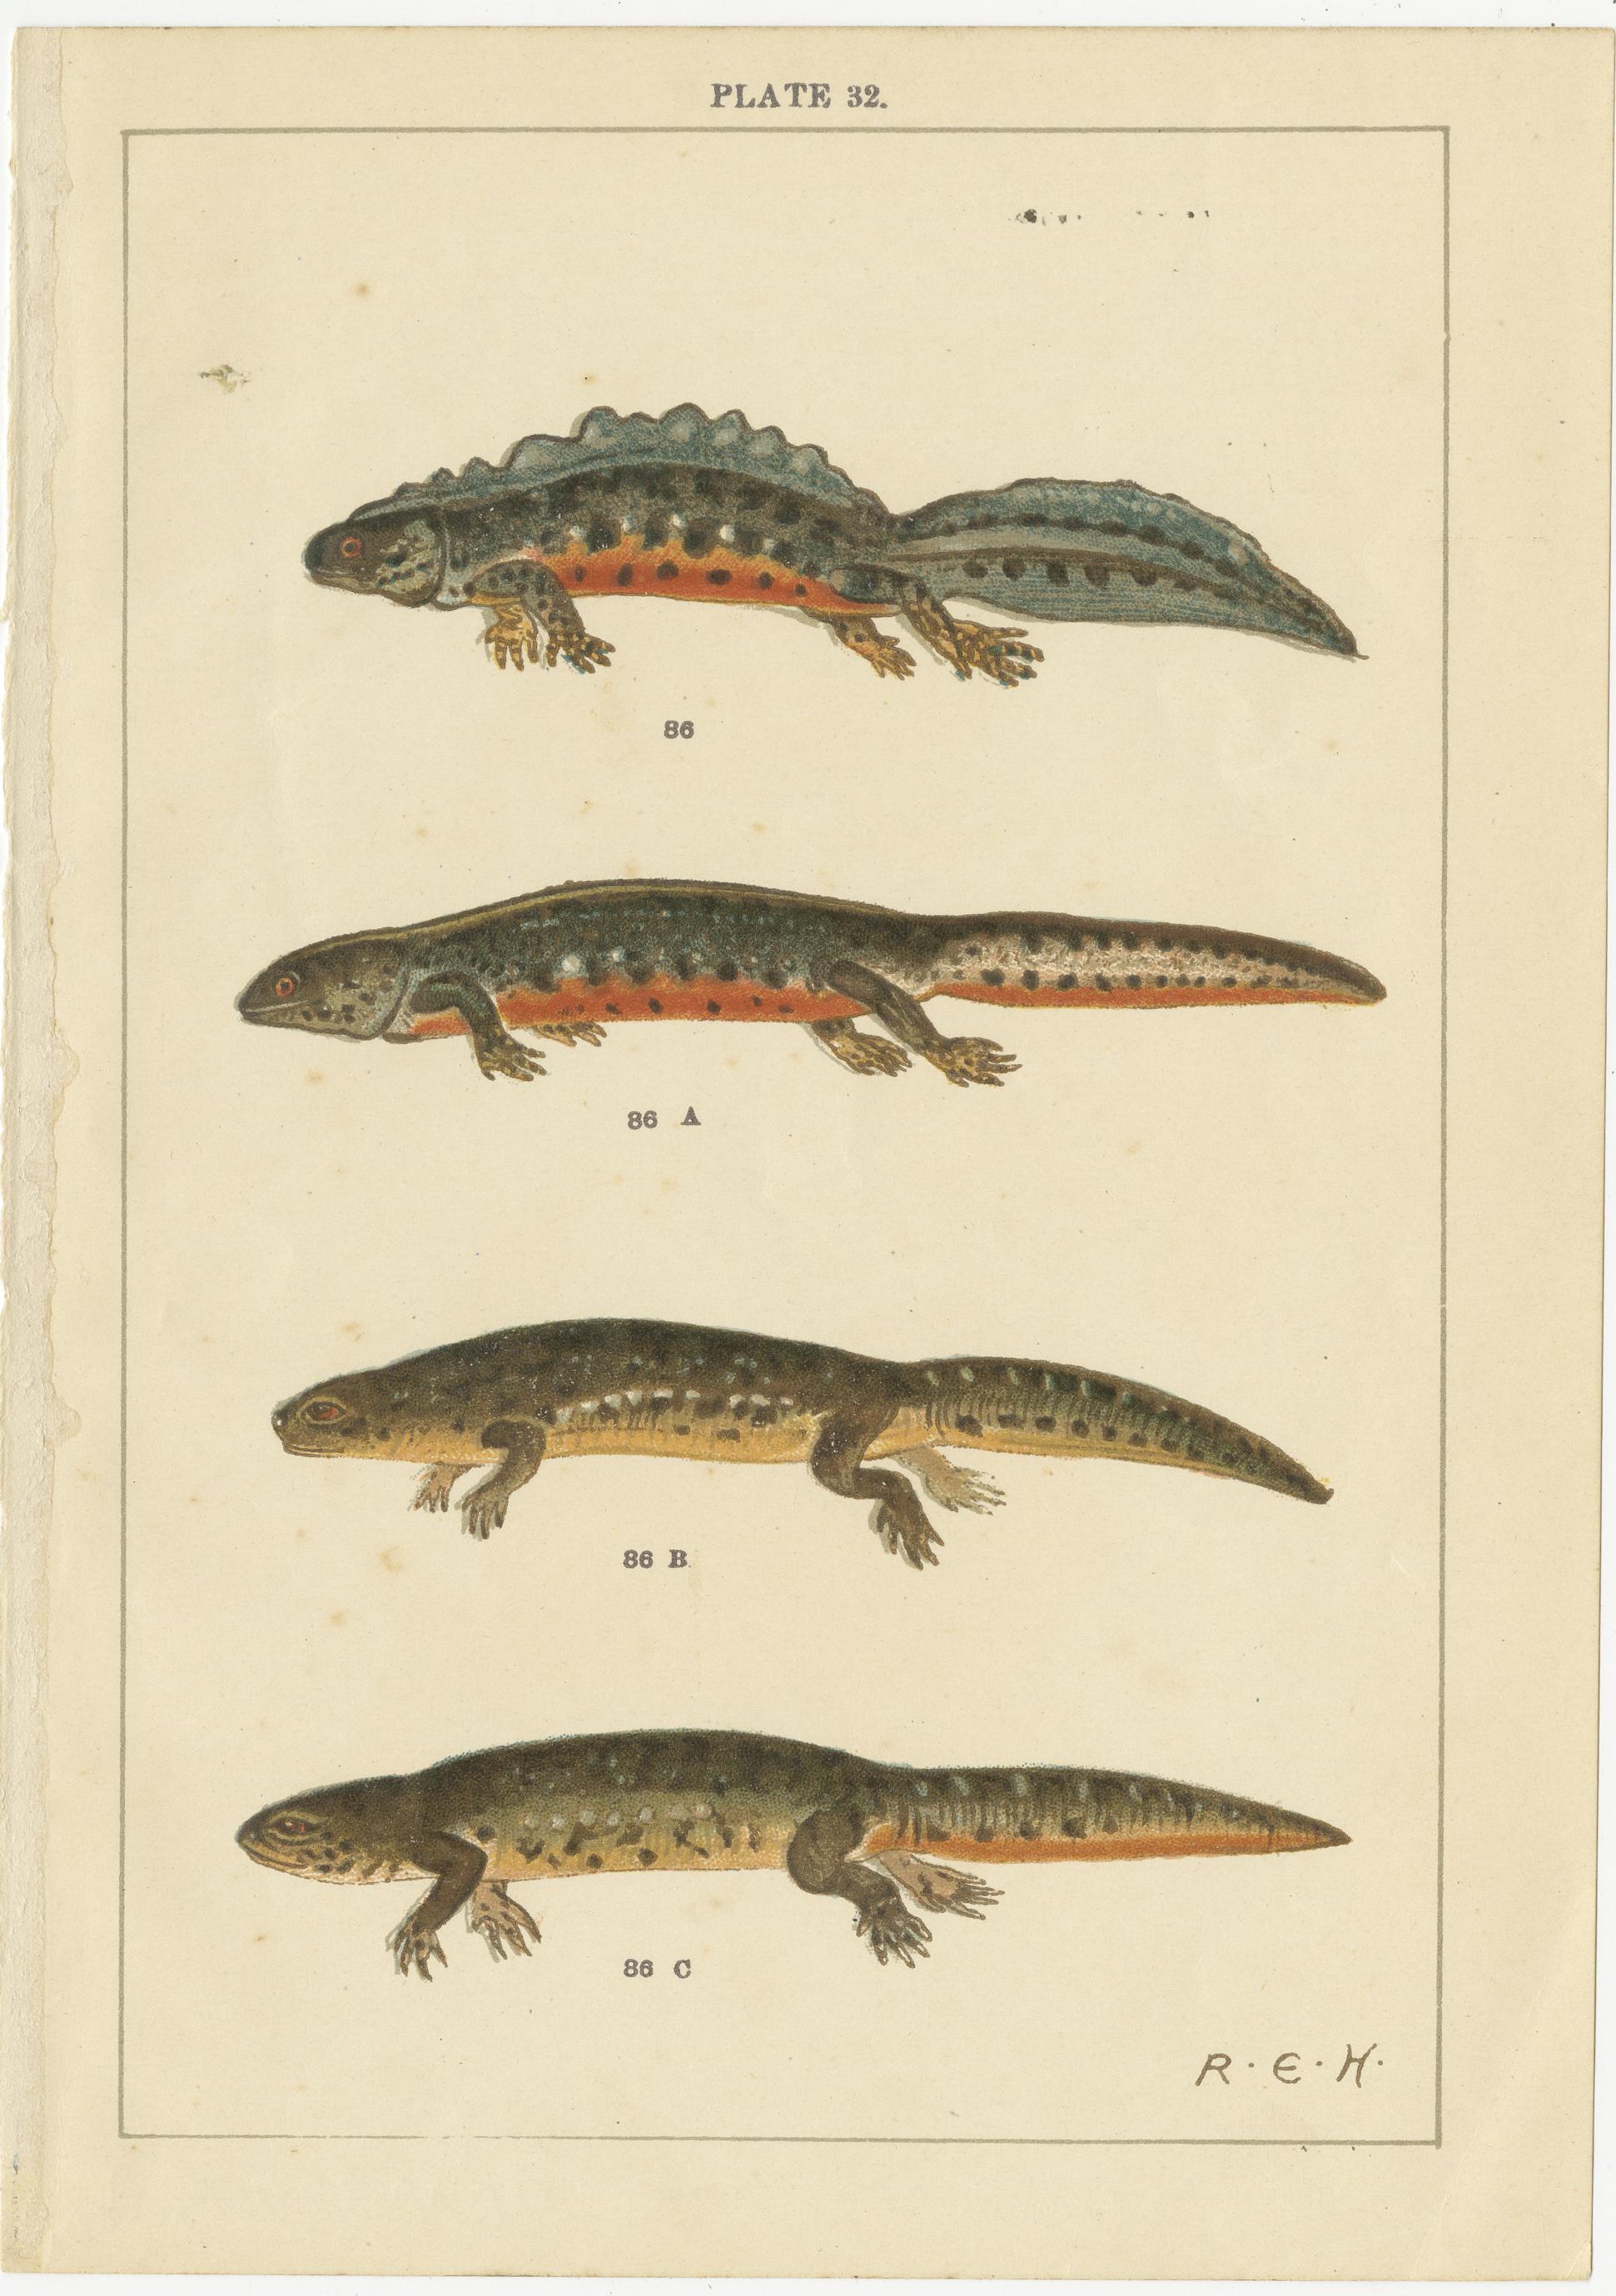 Plate 32 and Plate 33. Chromolithographs of various reptiles. Source unknown, to be determined. Published circa 1920.